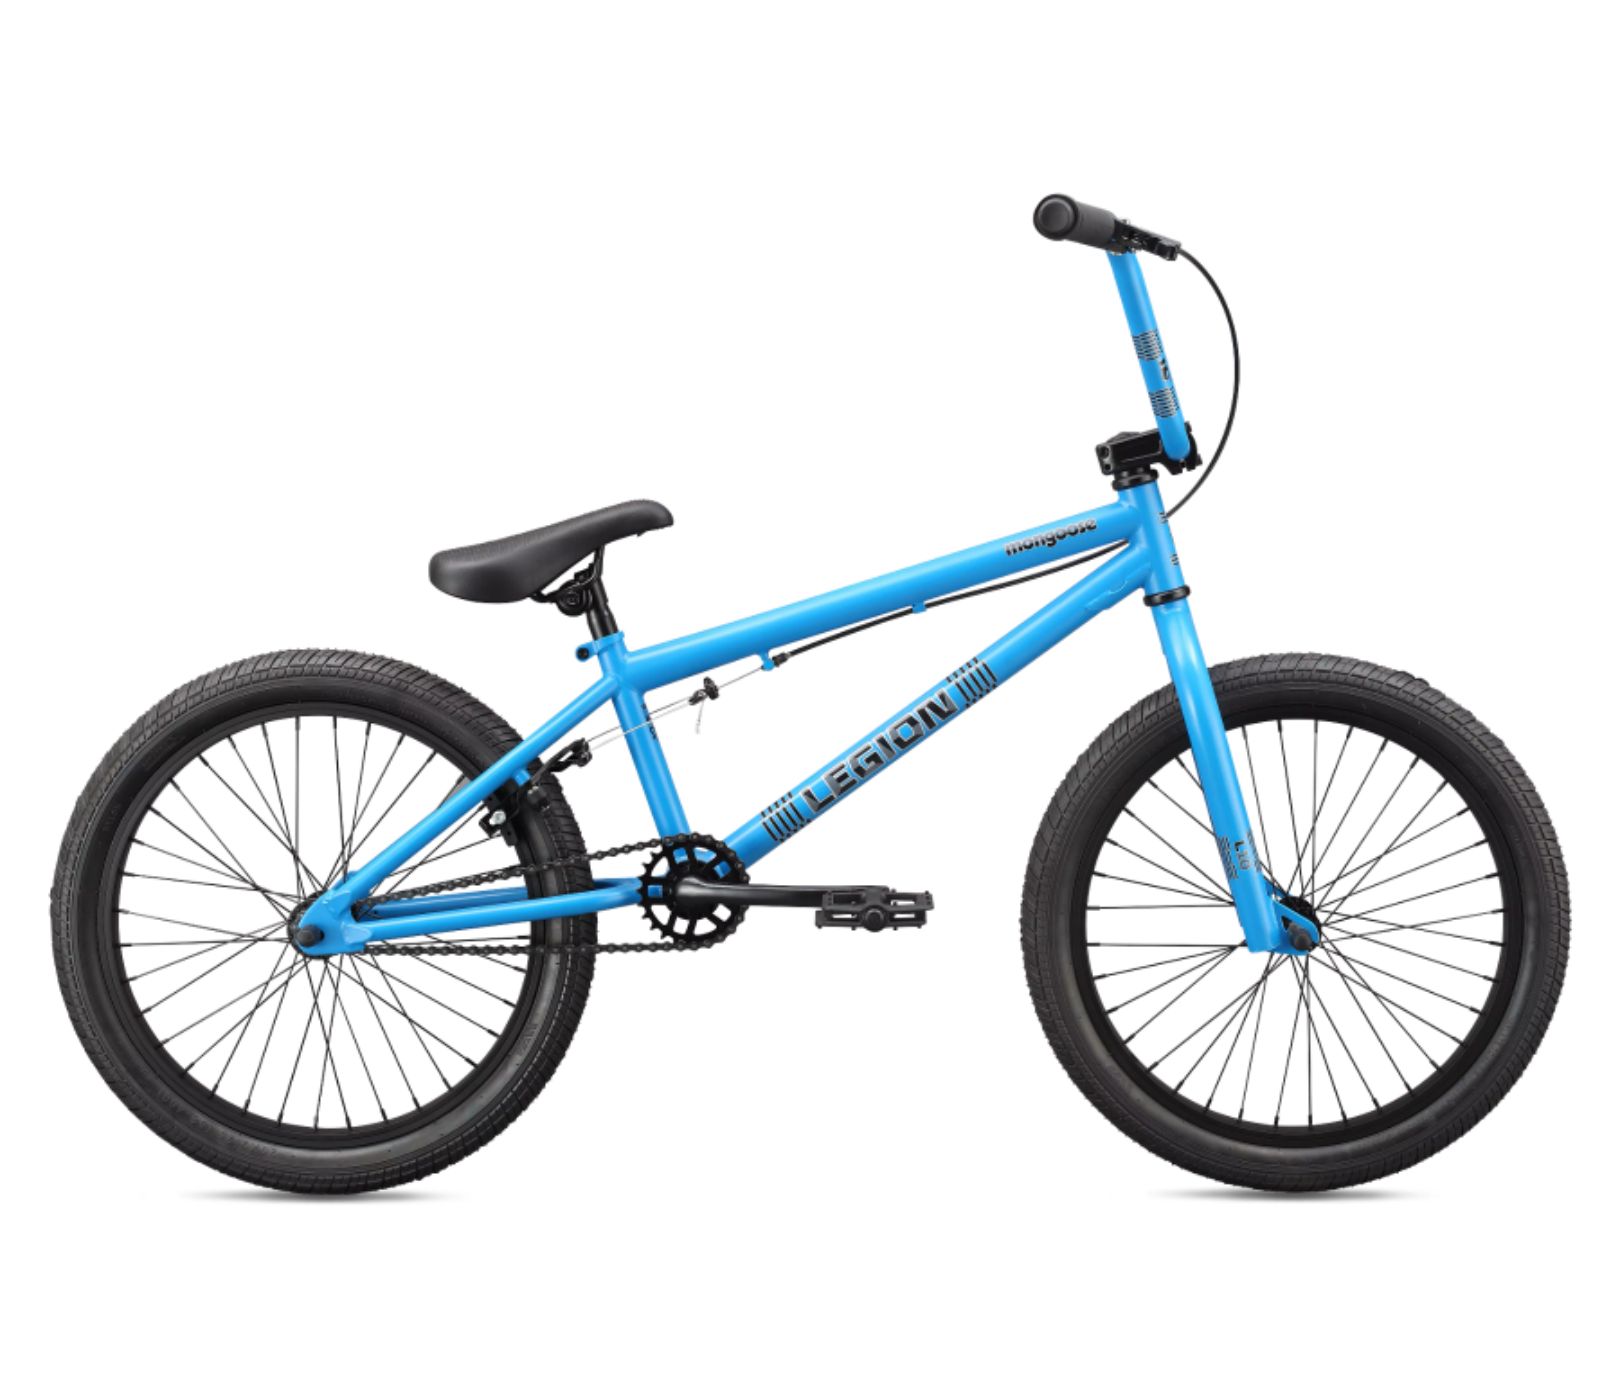 eeuw Perth Draai vast Best BMX Bikes for Sale | Cheap BMX Bicycle for Sale